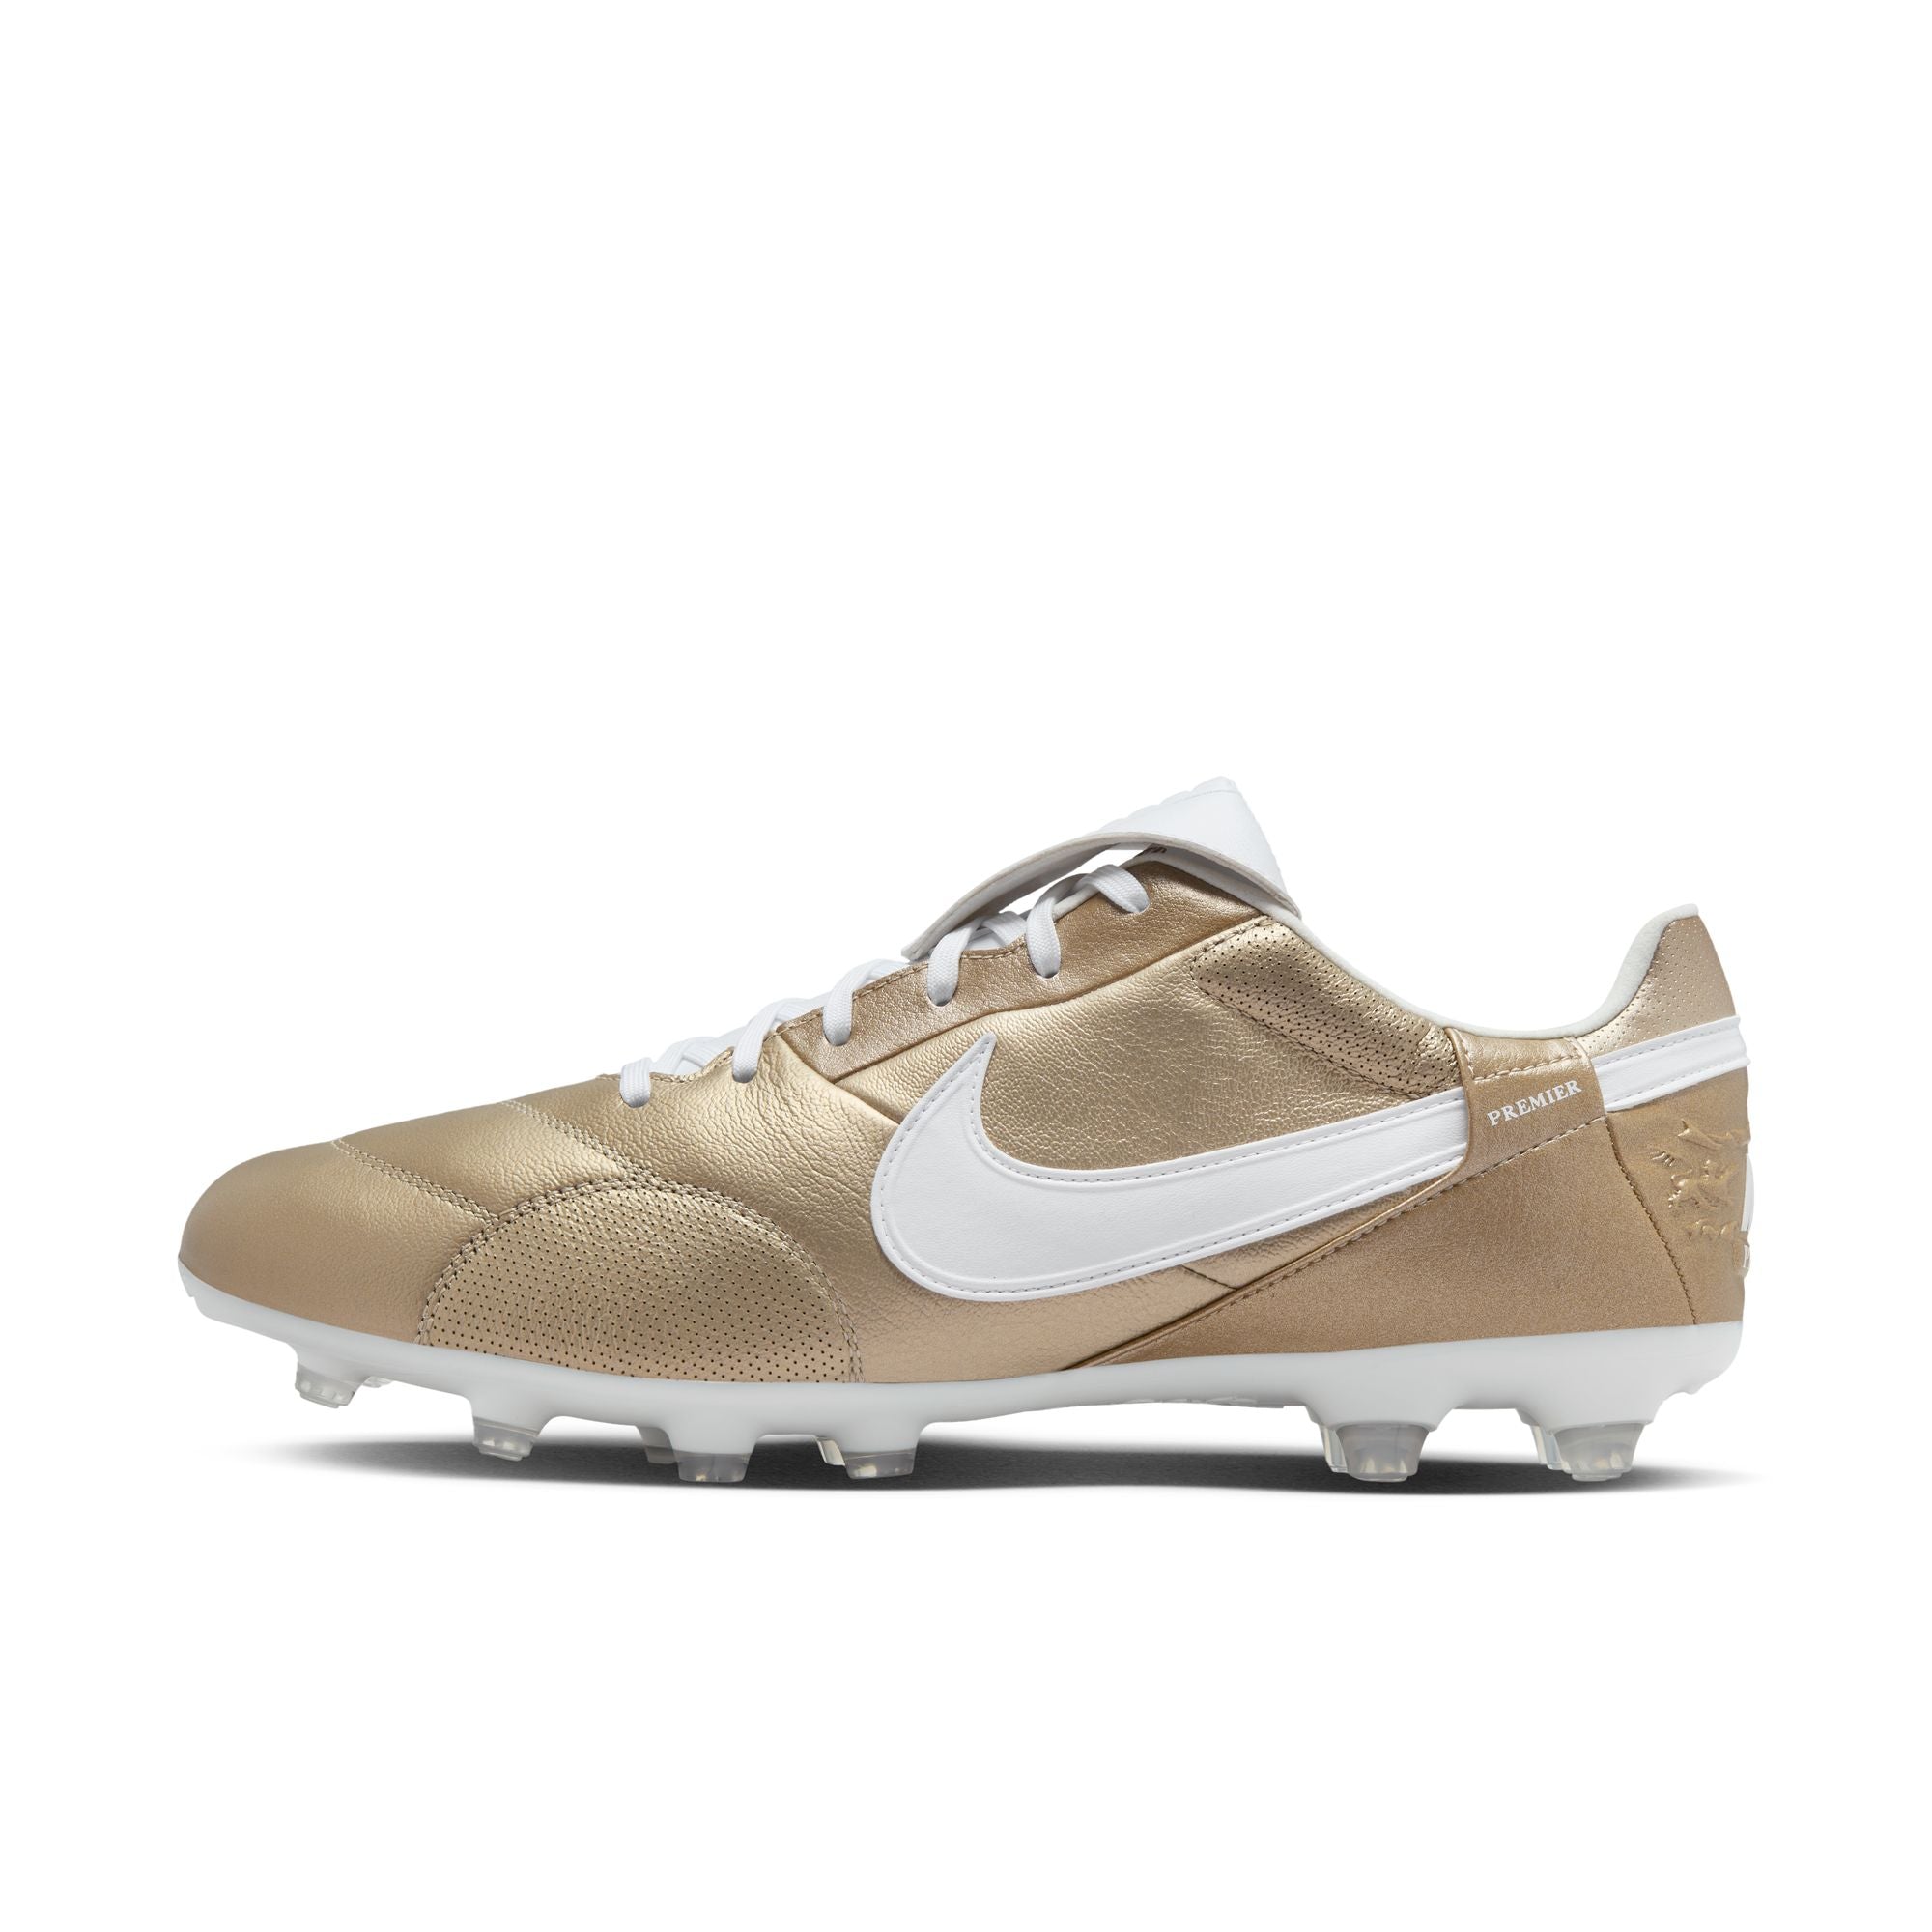 Nike Premier 3 Firm-Ground Low-Top Soccer Cleats